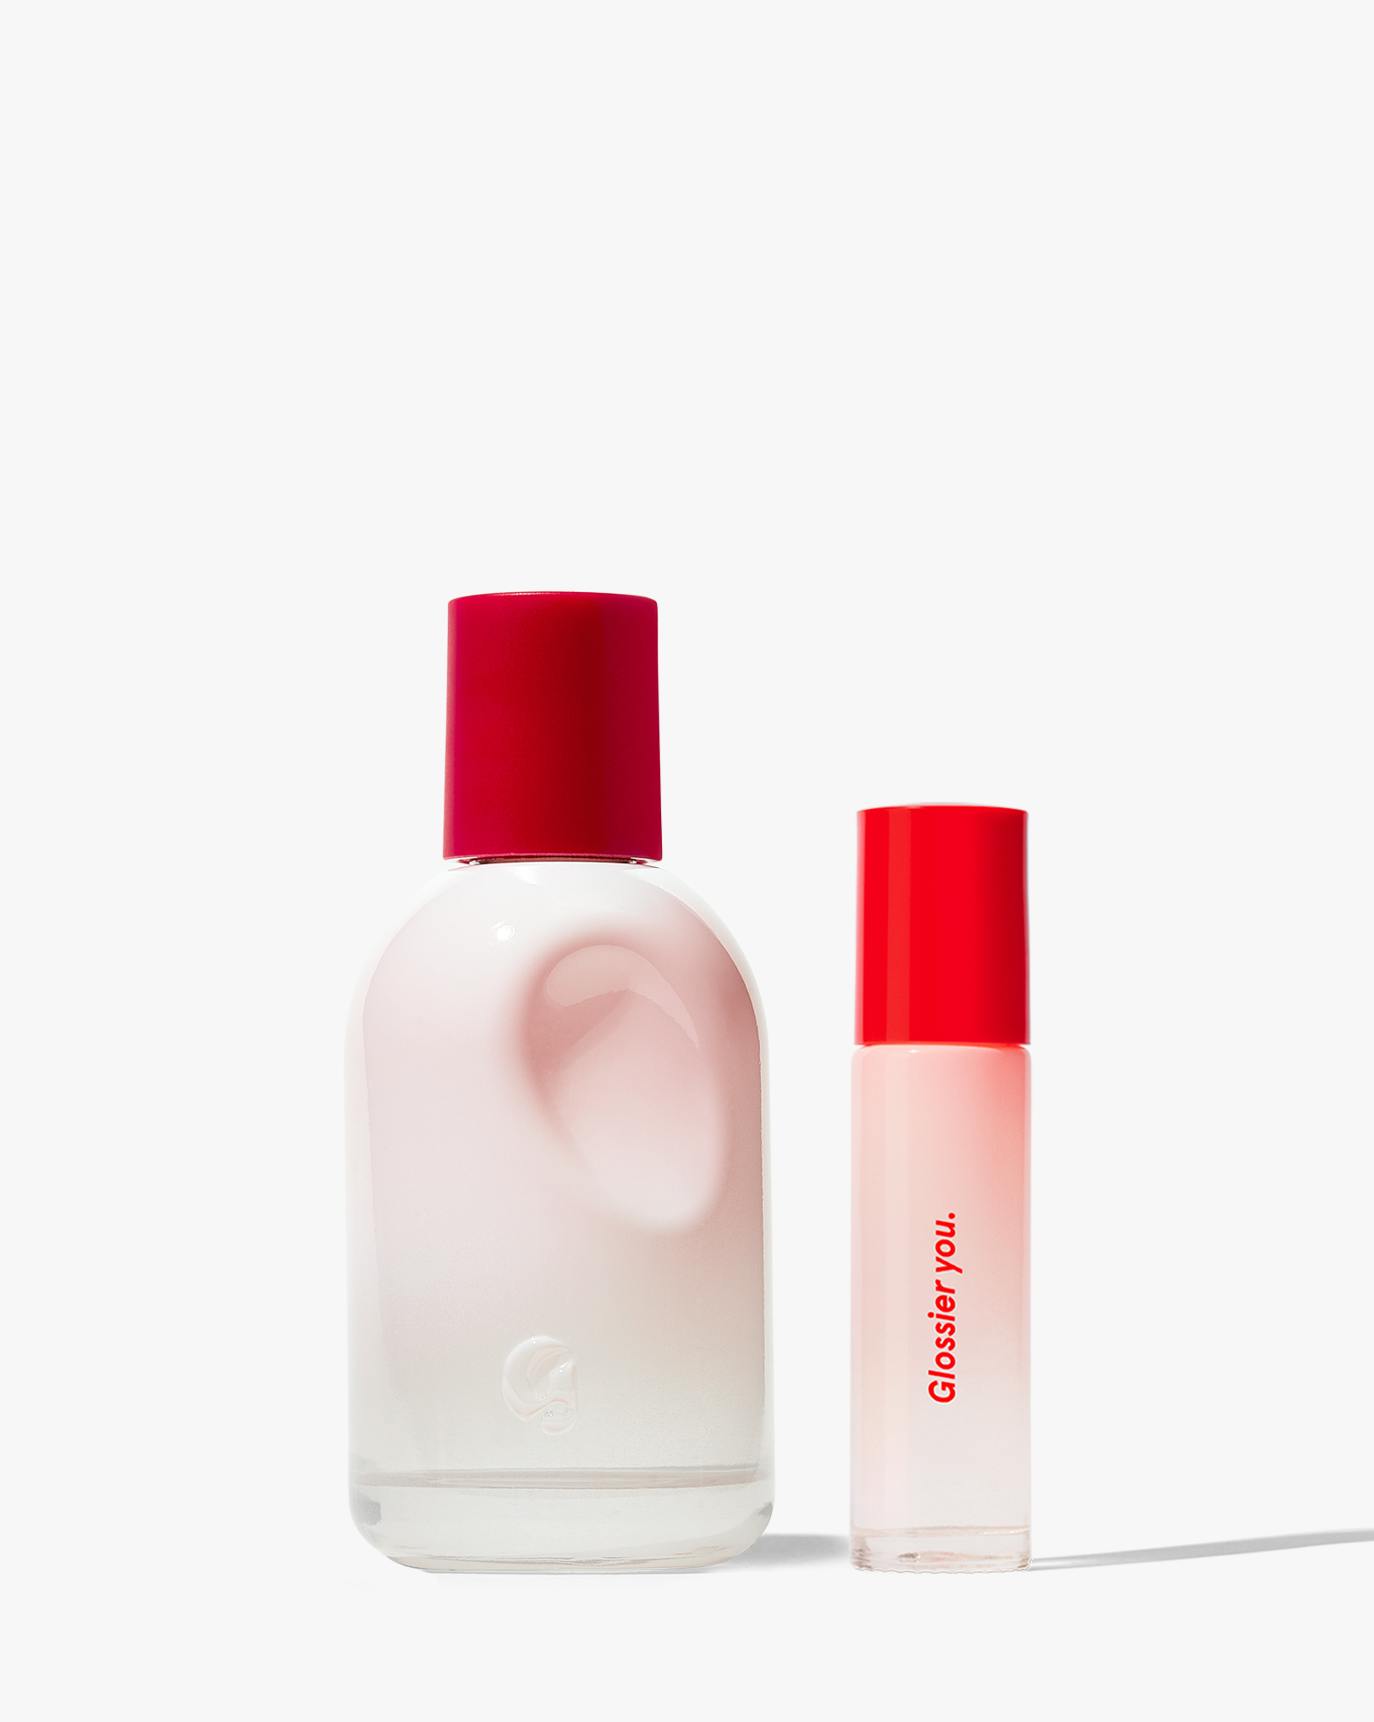 Glossier you. two ways.